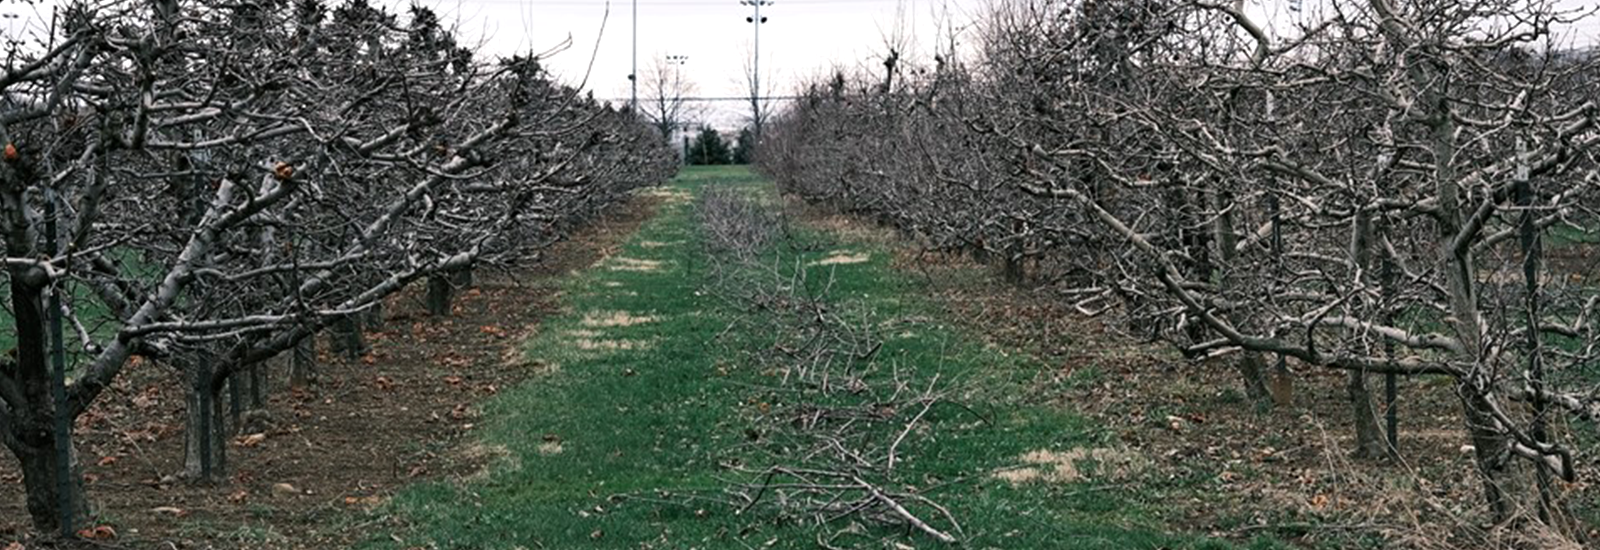 Photograph of two rows of bare fruit trees